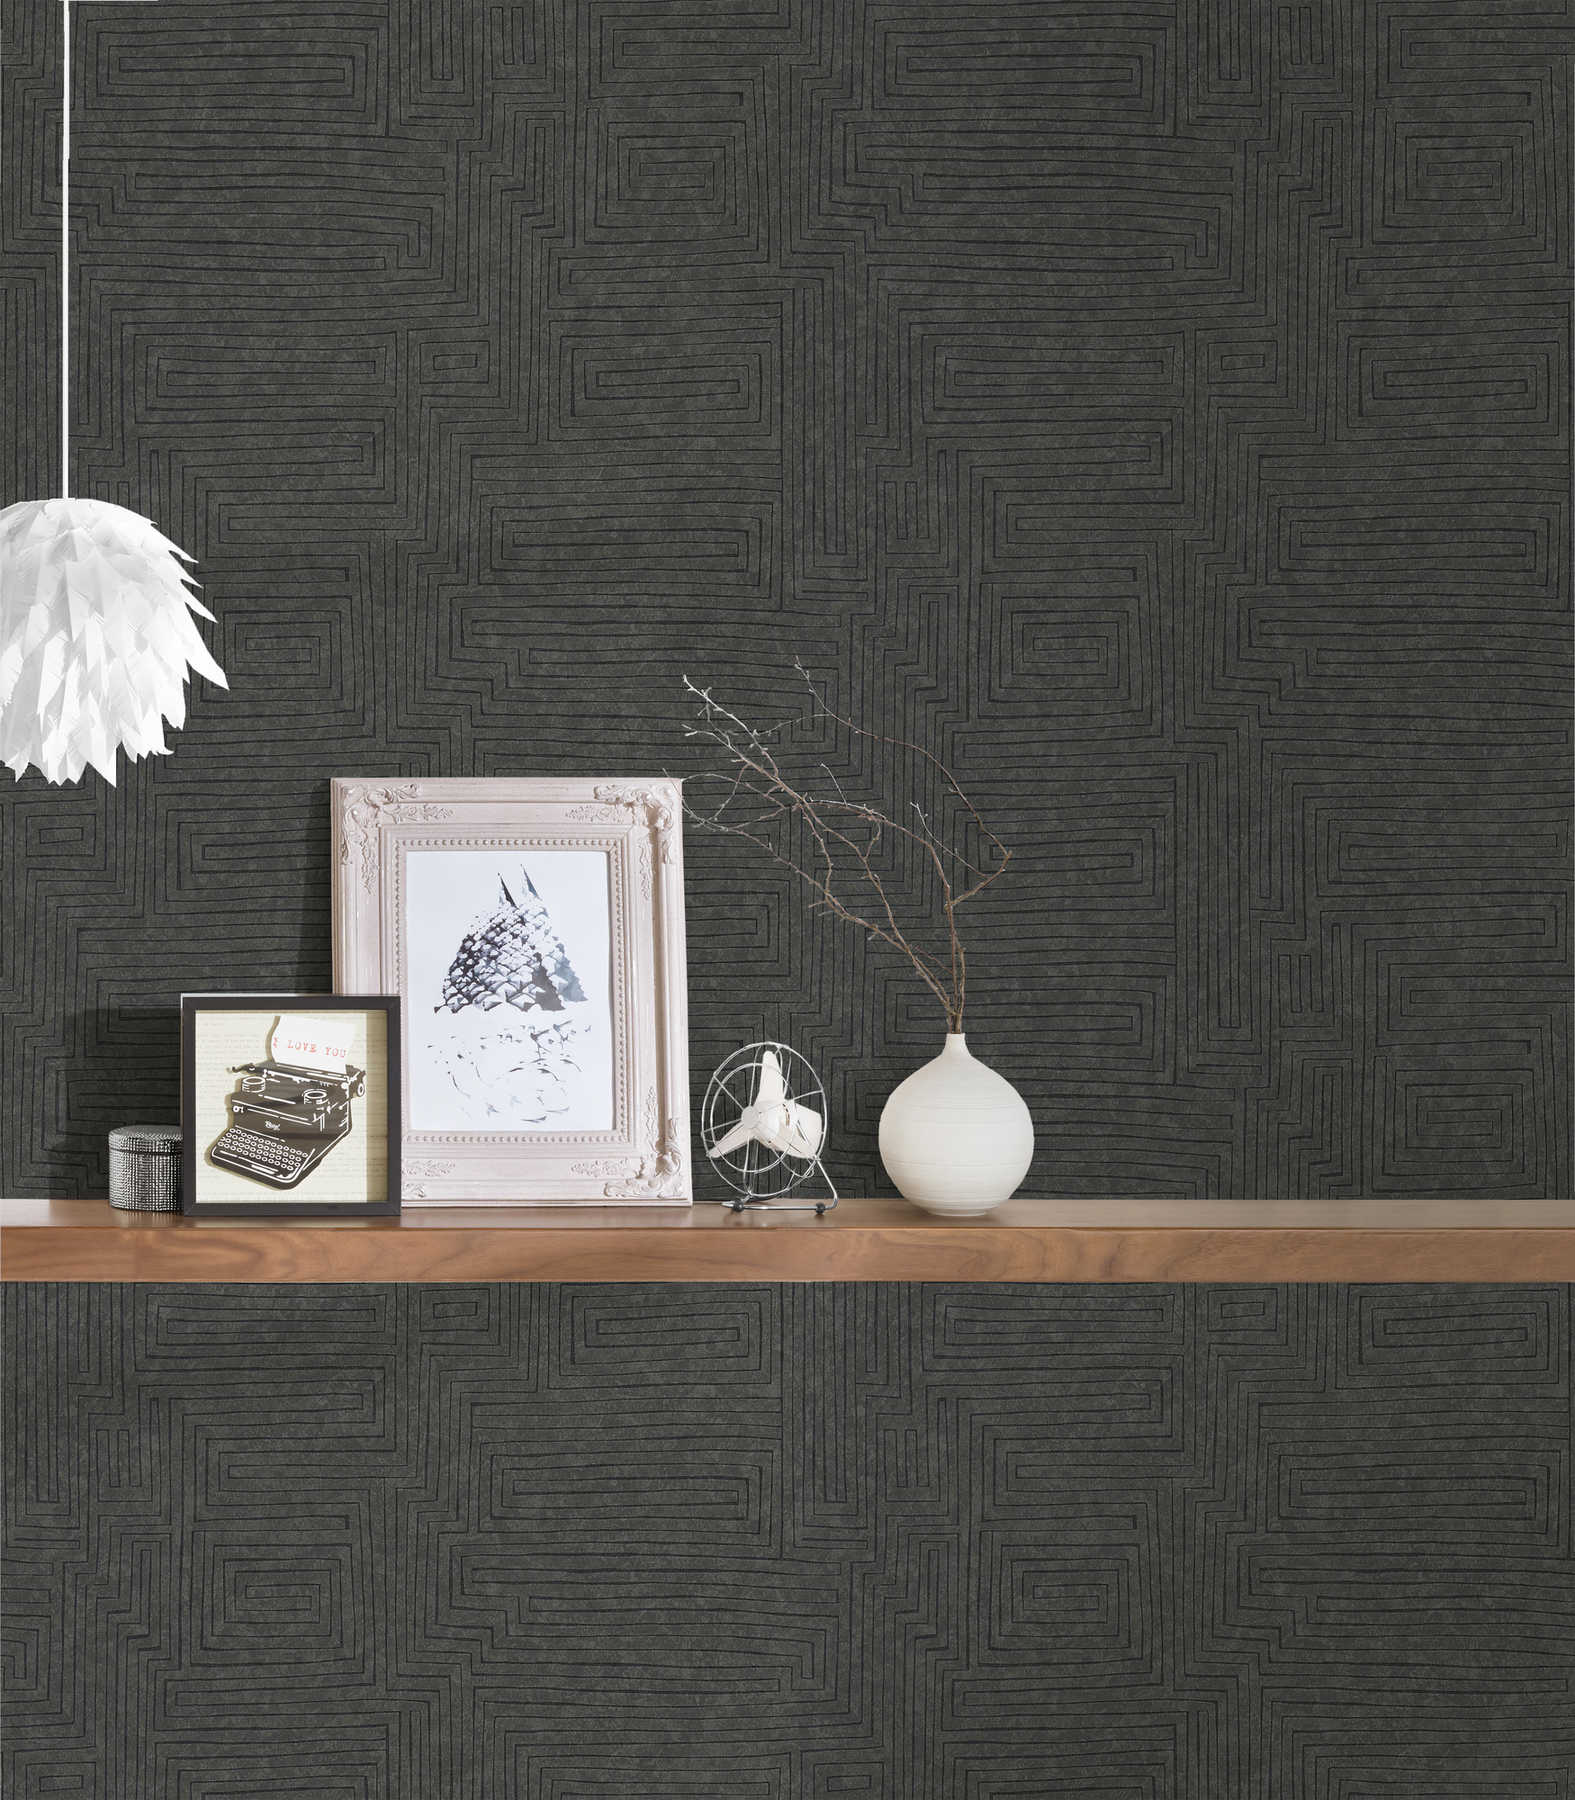             Ethno wallpaper plain with line pattern & texture effect - brown, black
        